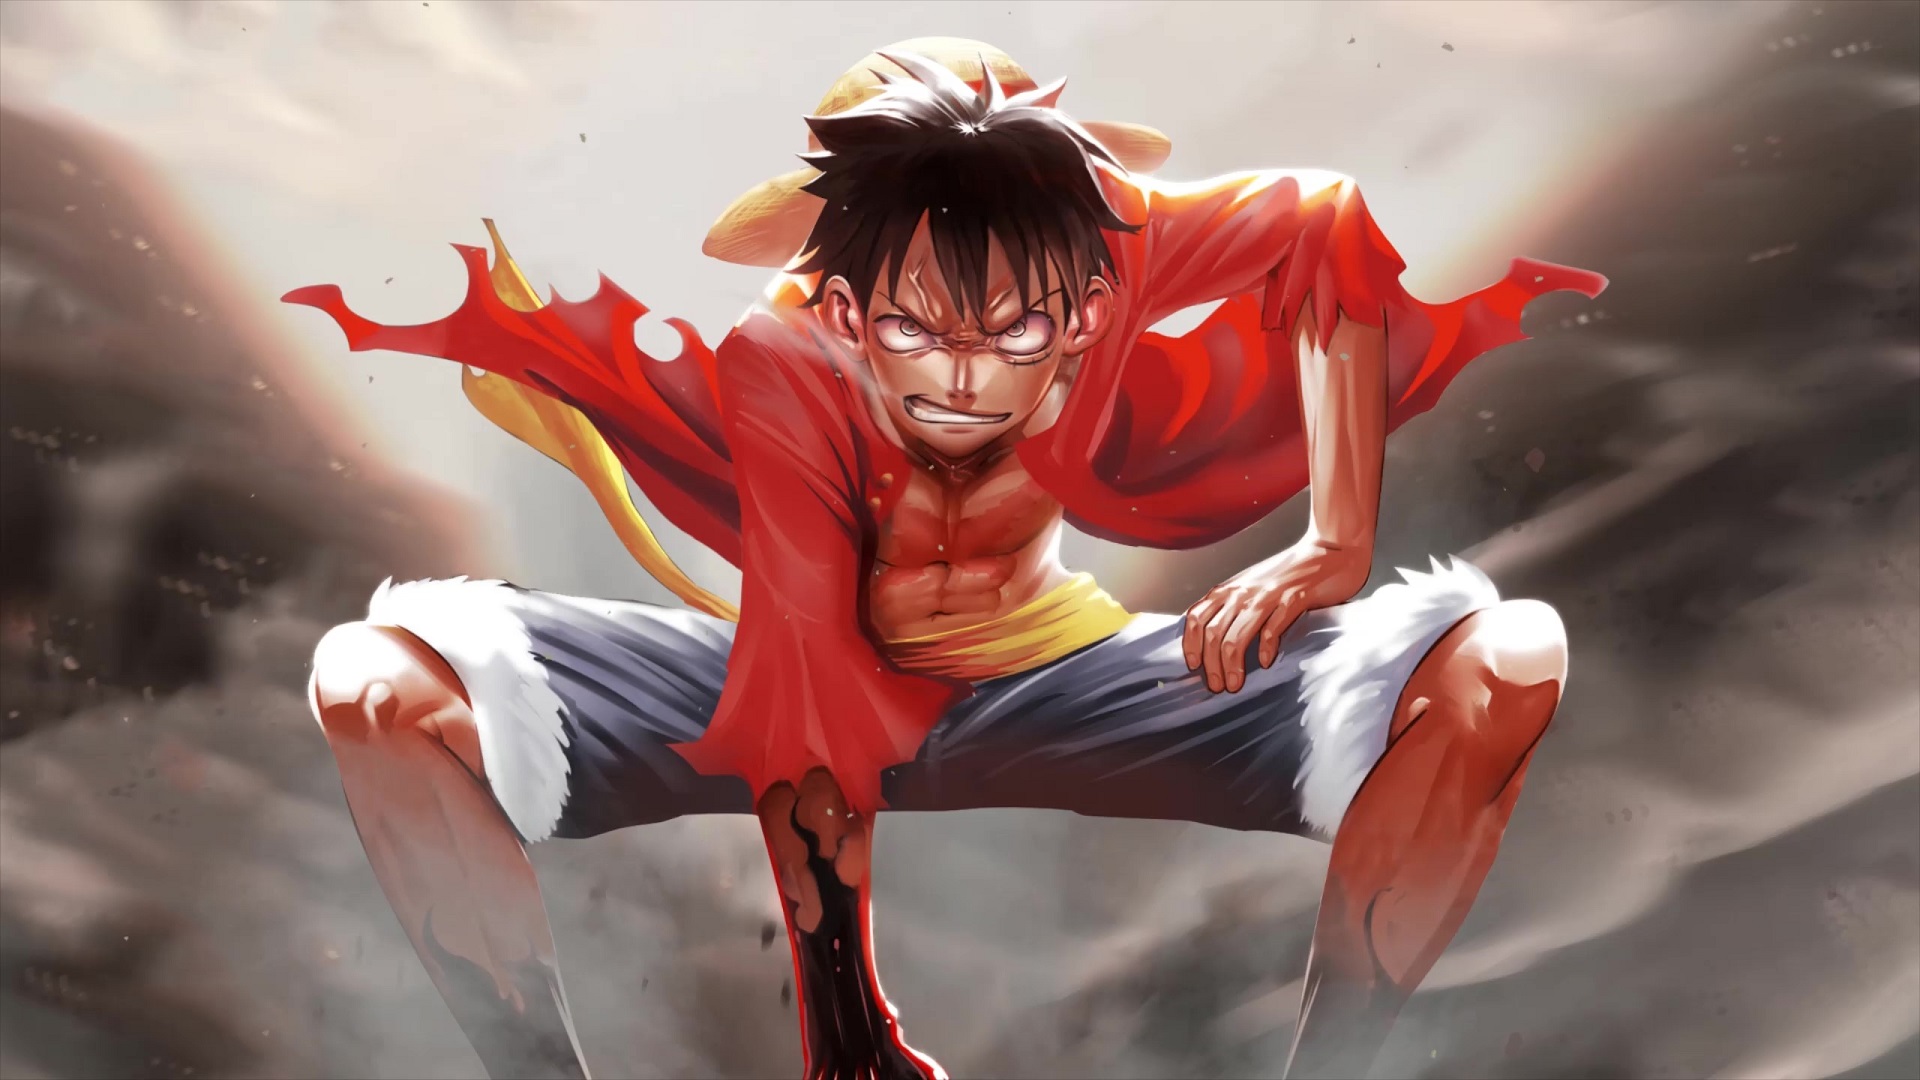 Luffy Gear 5 Full White Live Wallpaper  3840x2160  Rare Gallery HD Live  Wallpapers